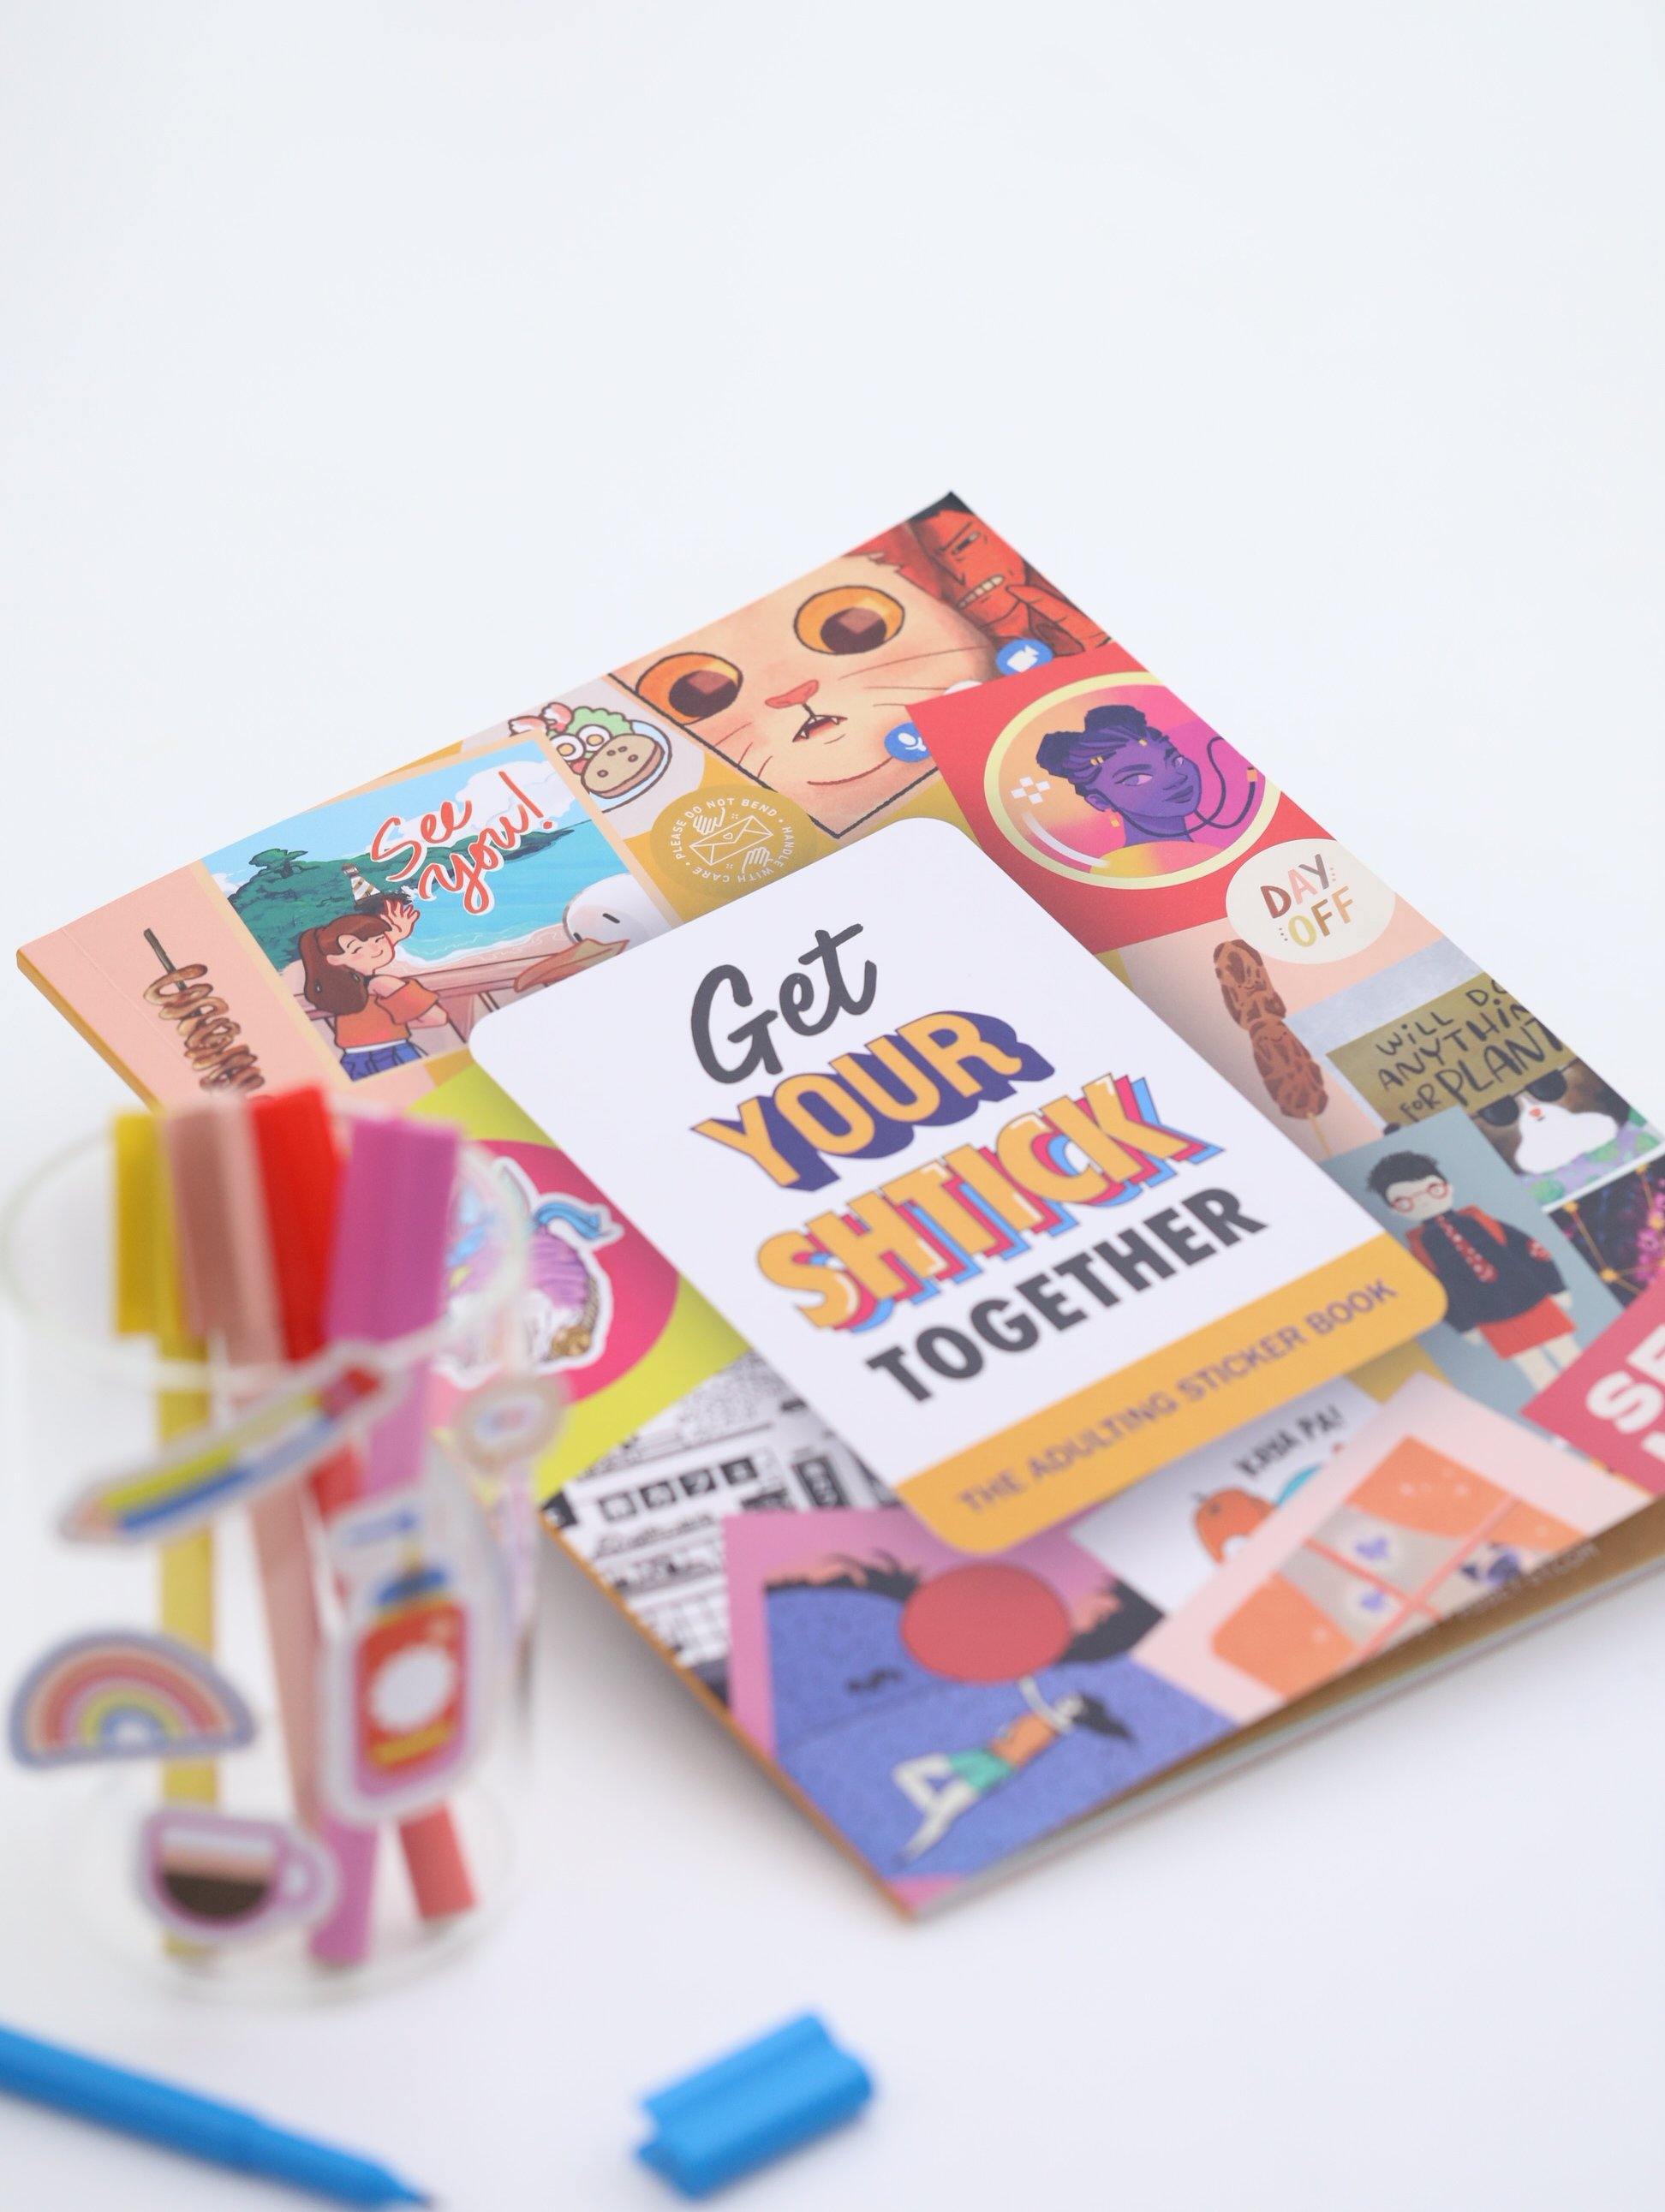 Get Your Shtick Together The Adulting Sticker Book-Merch-GooglyGooeys | Cricut | Arts Craft and DIY Store based in the Philippines